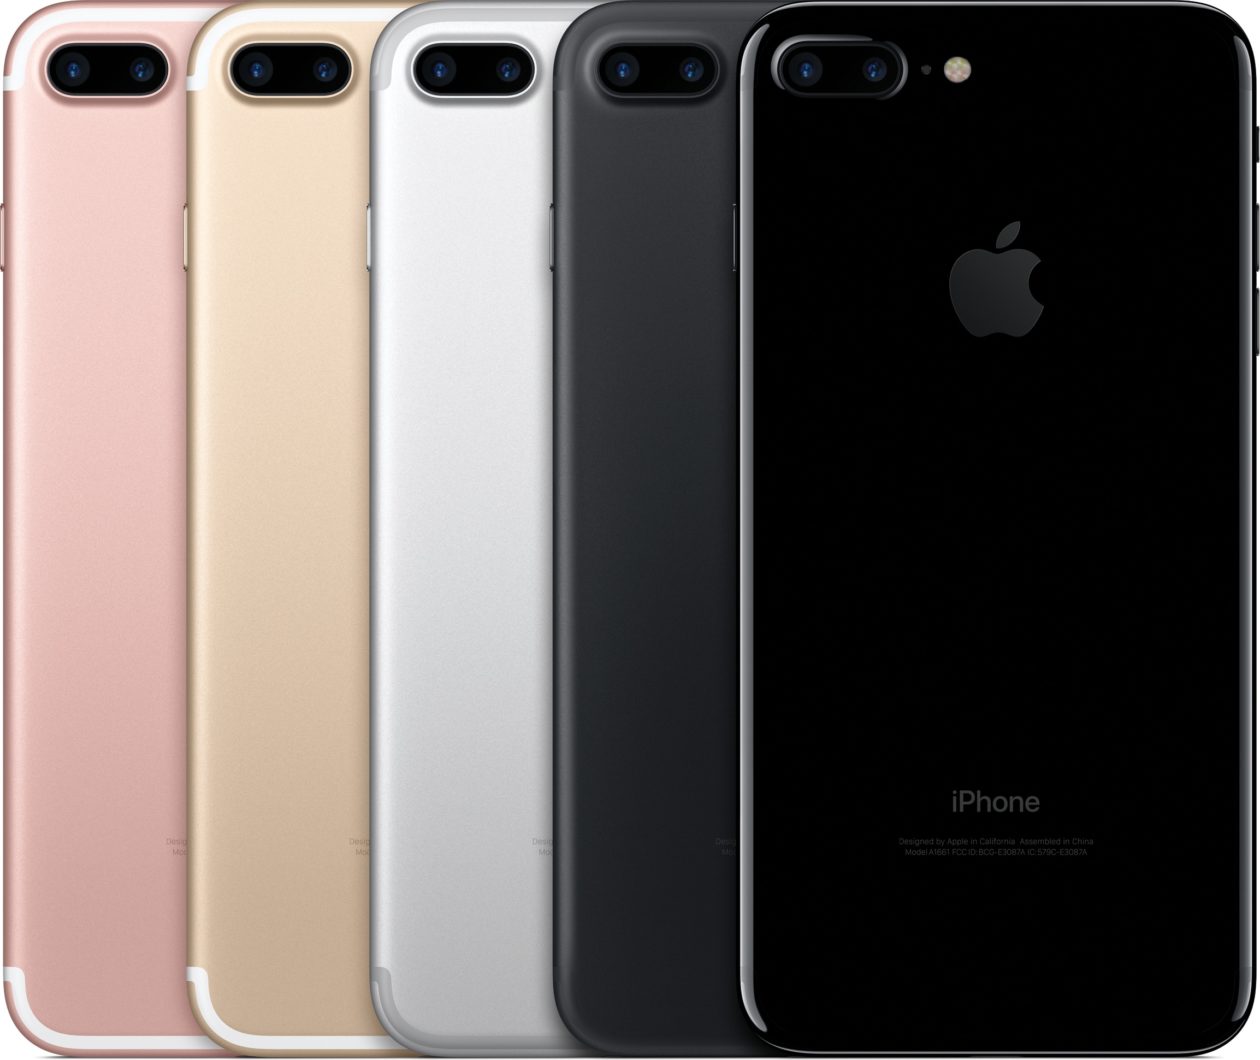 Analyst predicts that iPhone sales have already “passed the peak” and that they will fall further in the coming months